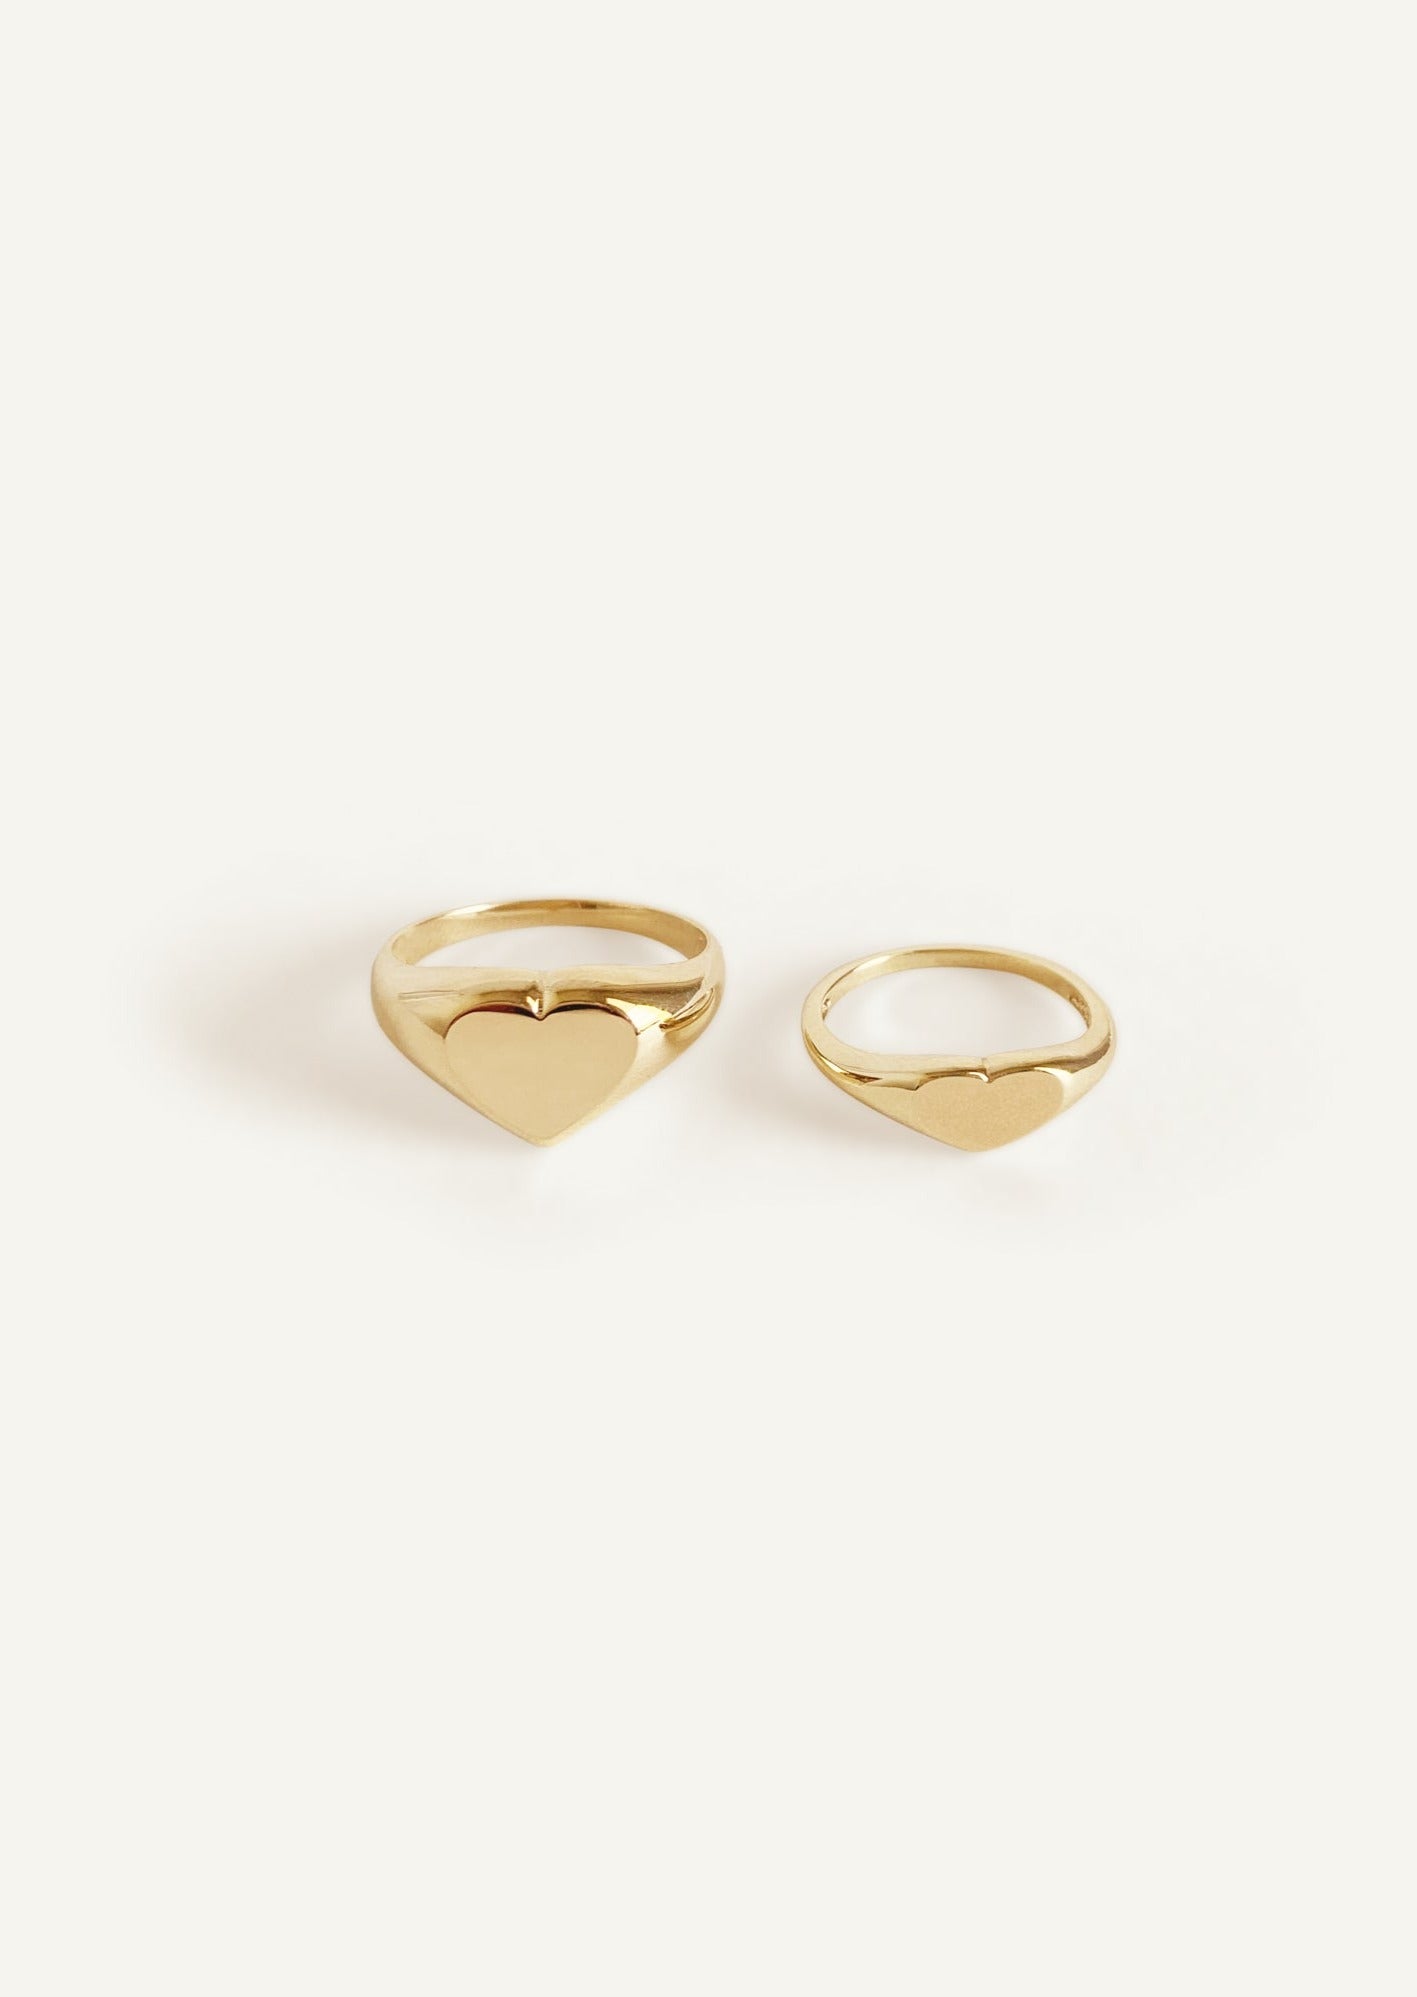 alt="Classic Heart Signet Ring compared to the petite heart signet ring"